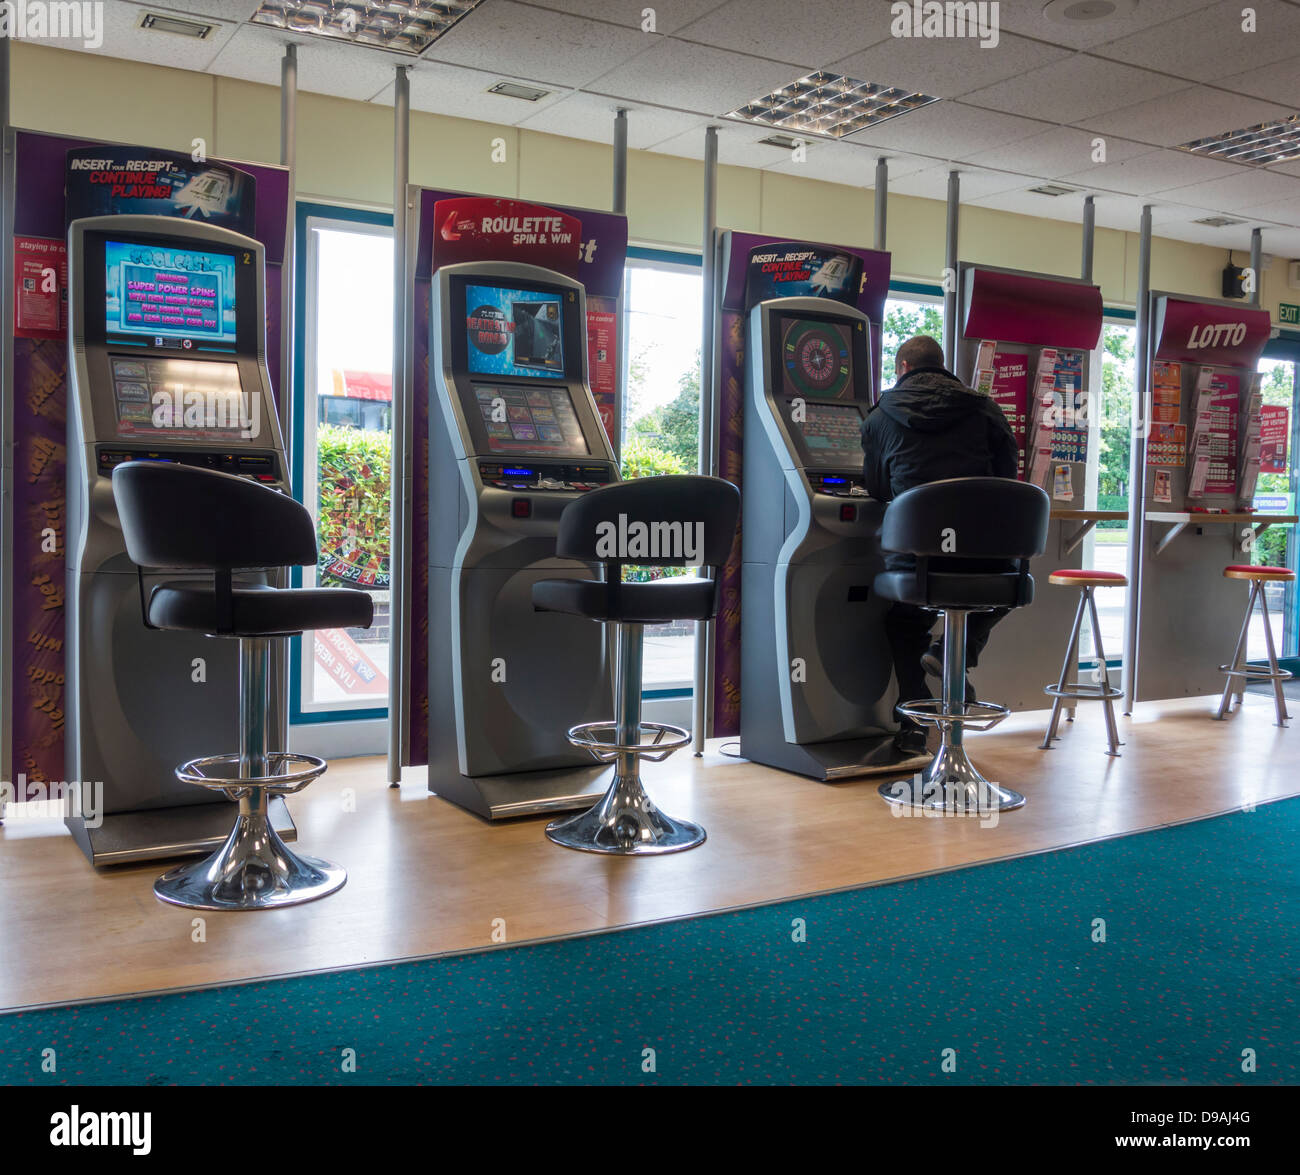 Roulette macchine (FOBT fixed odds betting terminale) in Ladbrokes Bookmakers, England, Regno Unito Foto Stock